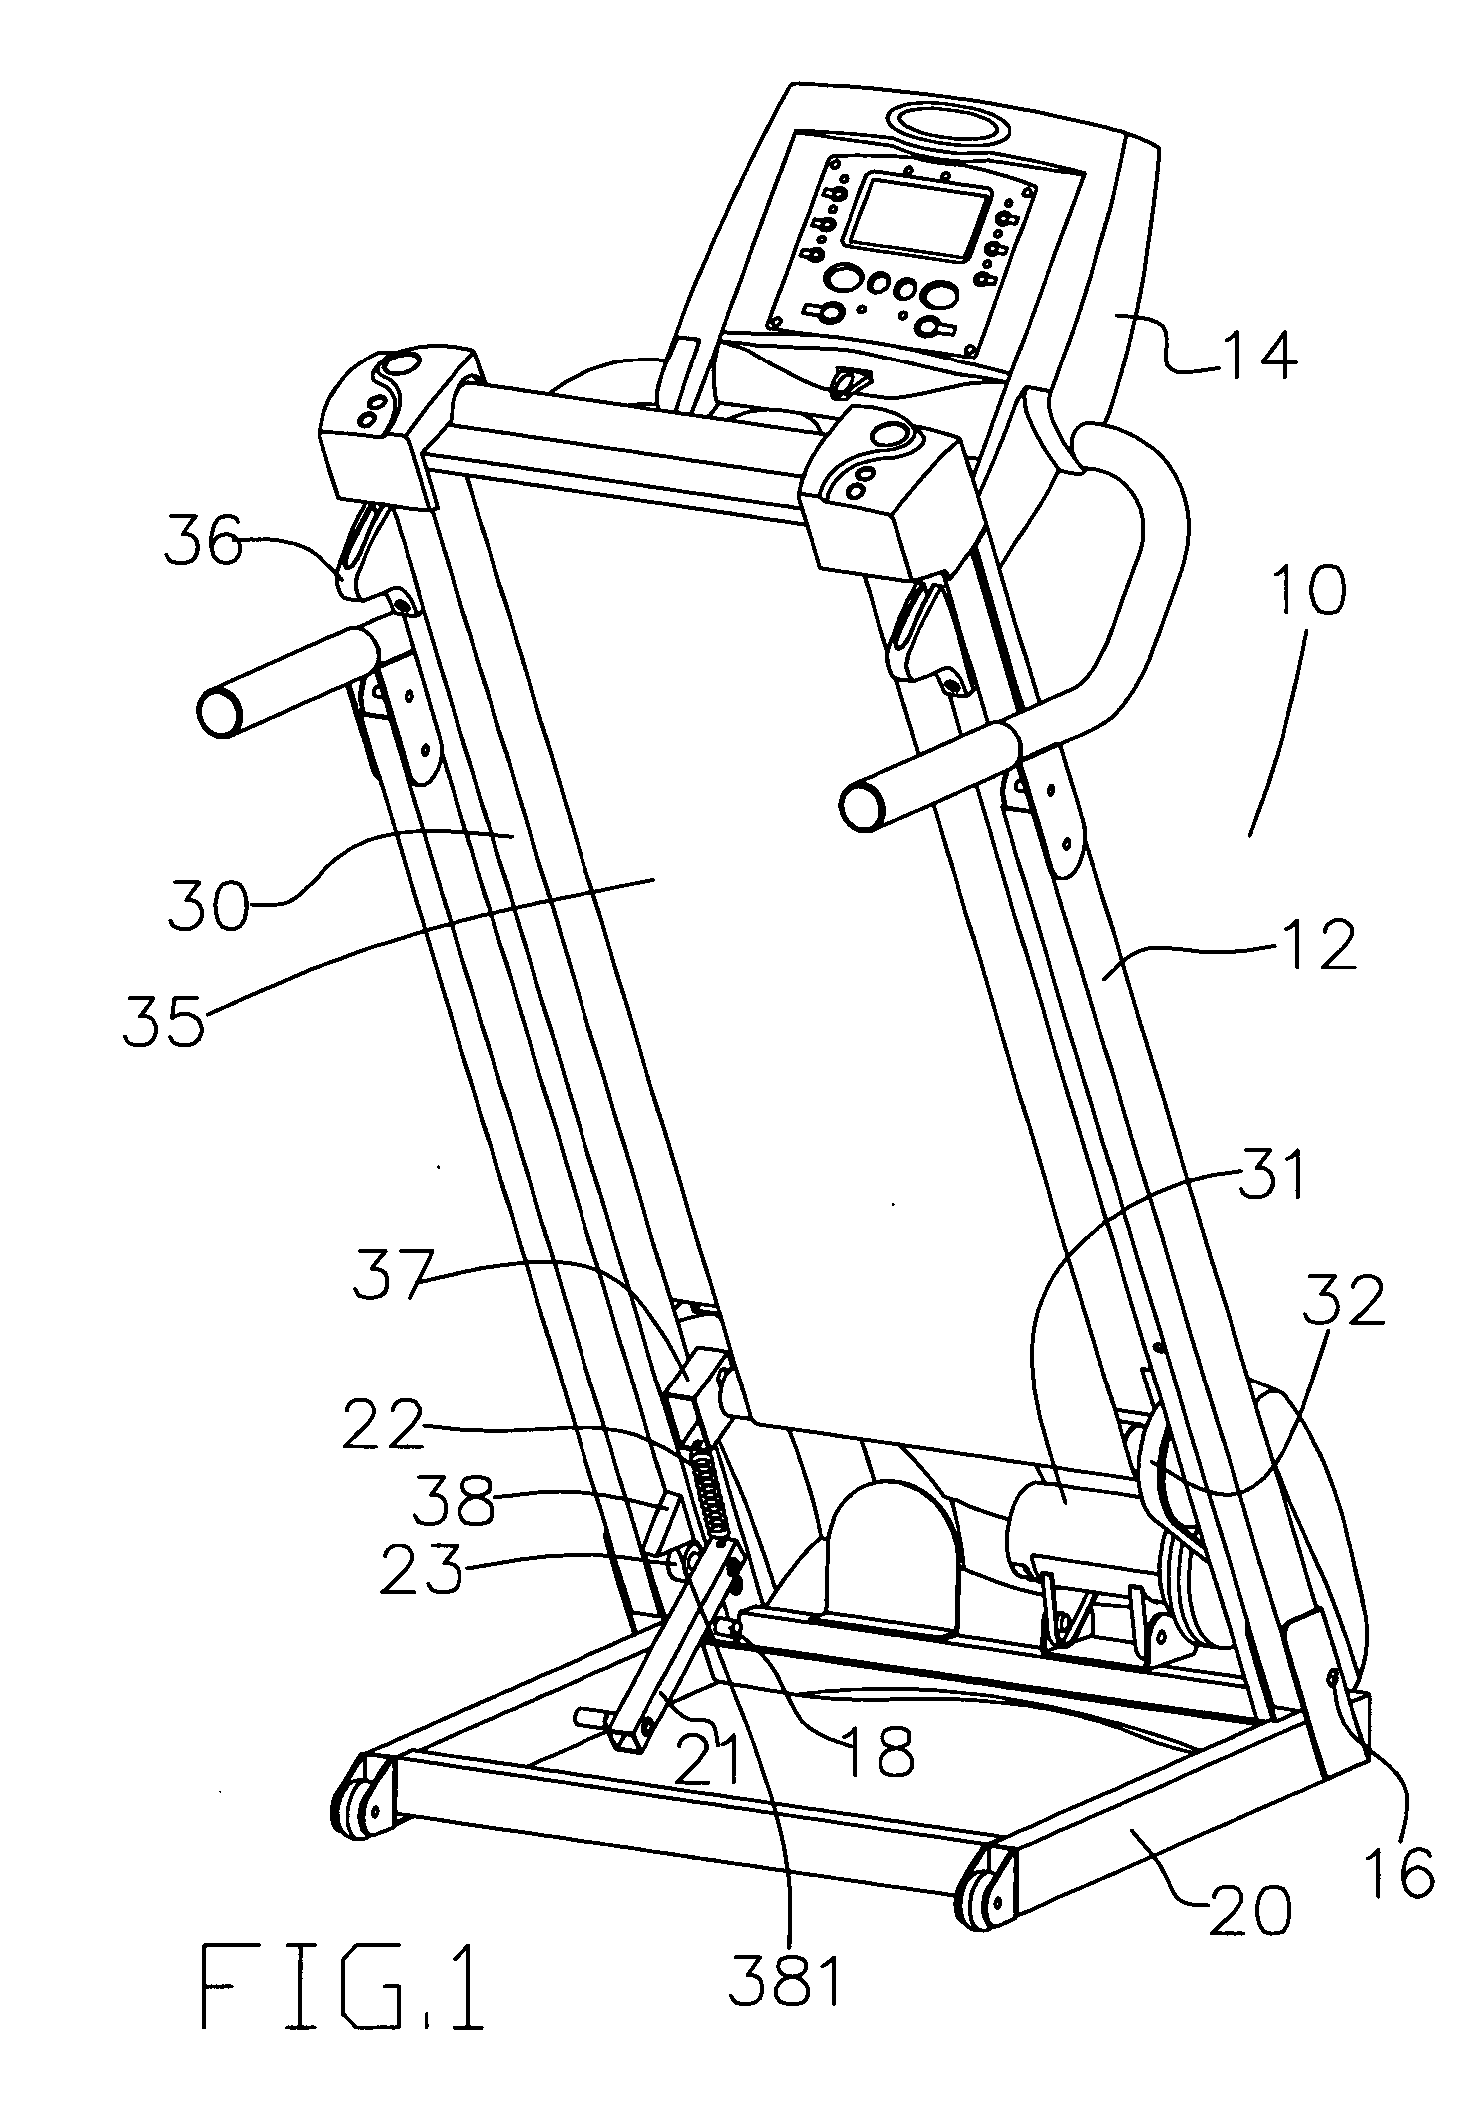 Supporting mechanism for a deck frame of a folding-up treadmill